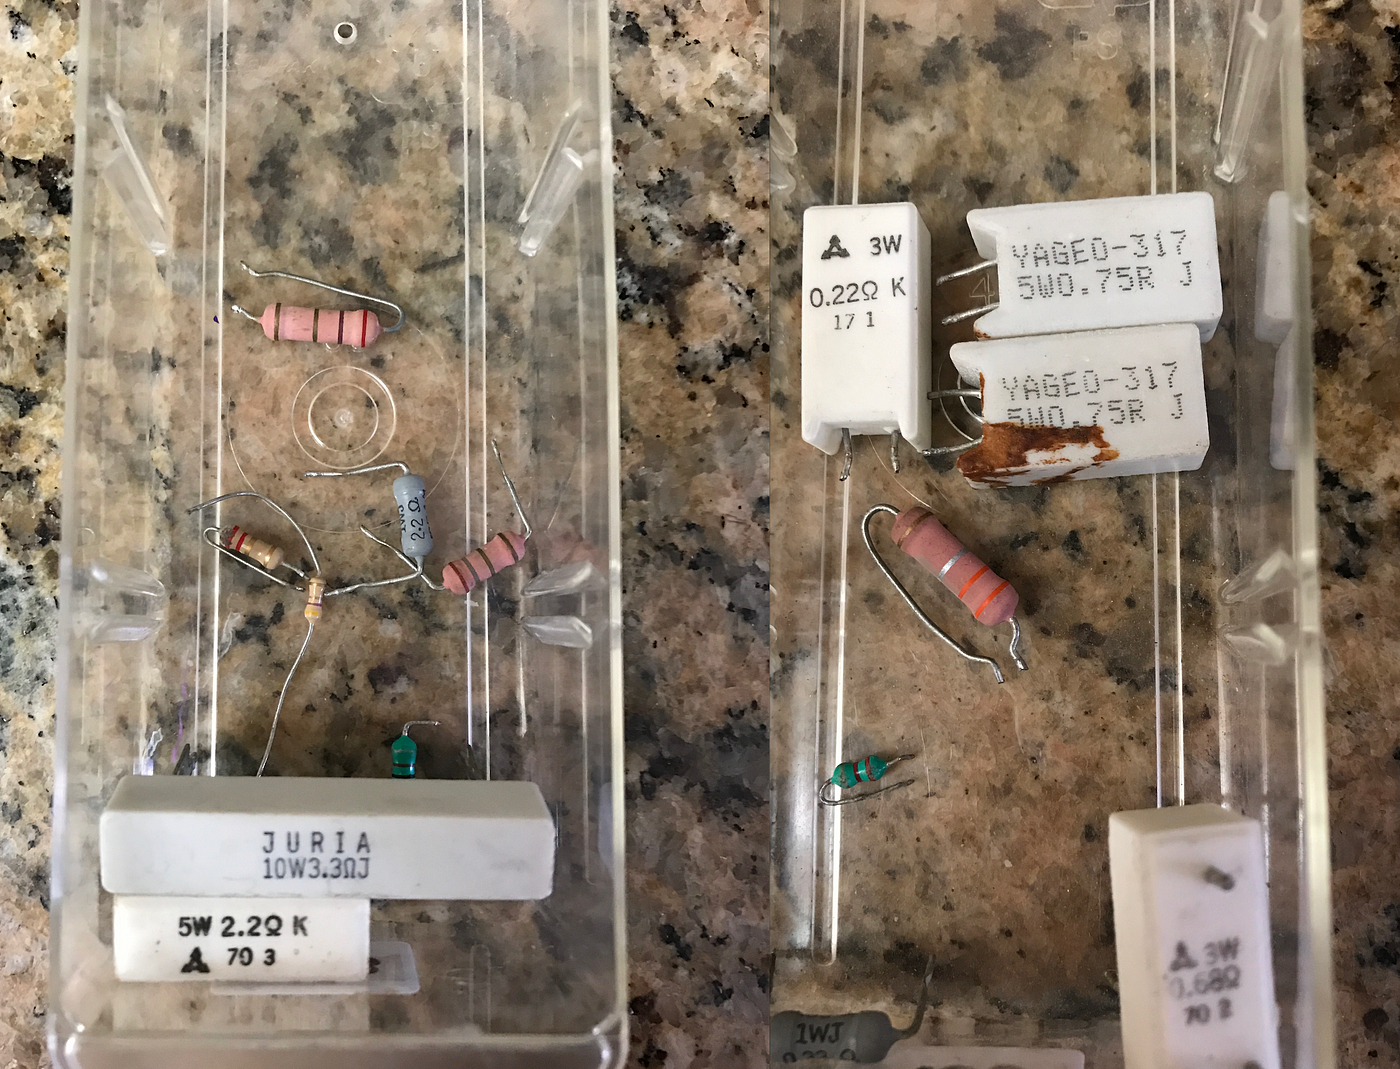 Organizing electronic components. There comes a time in every